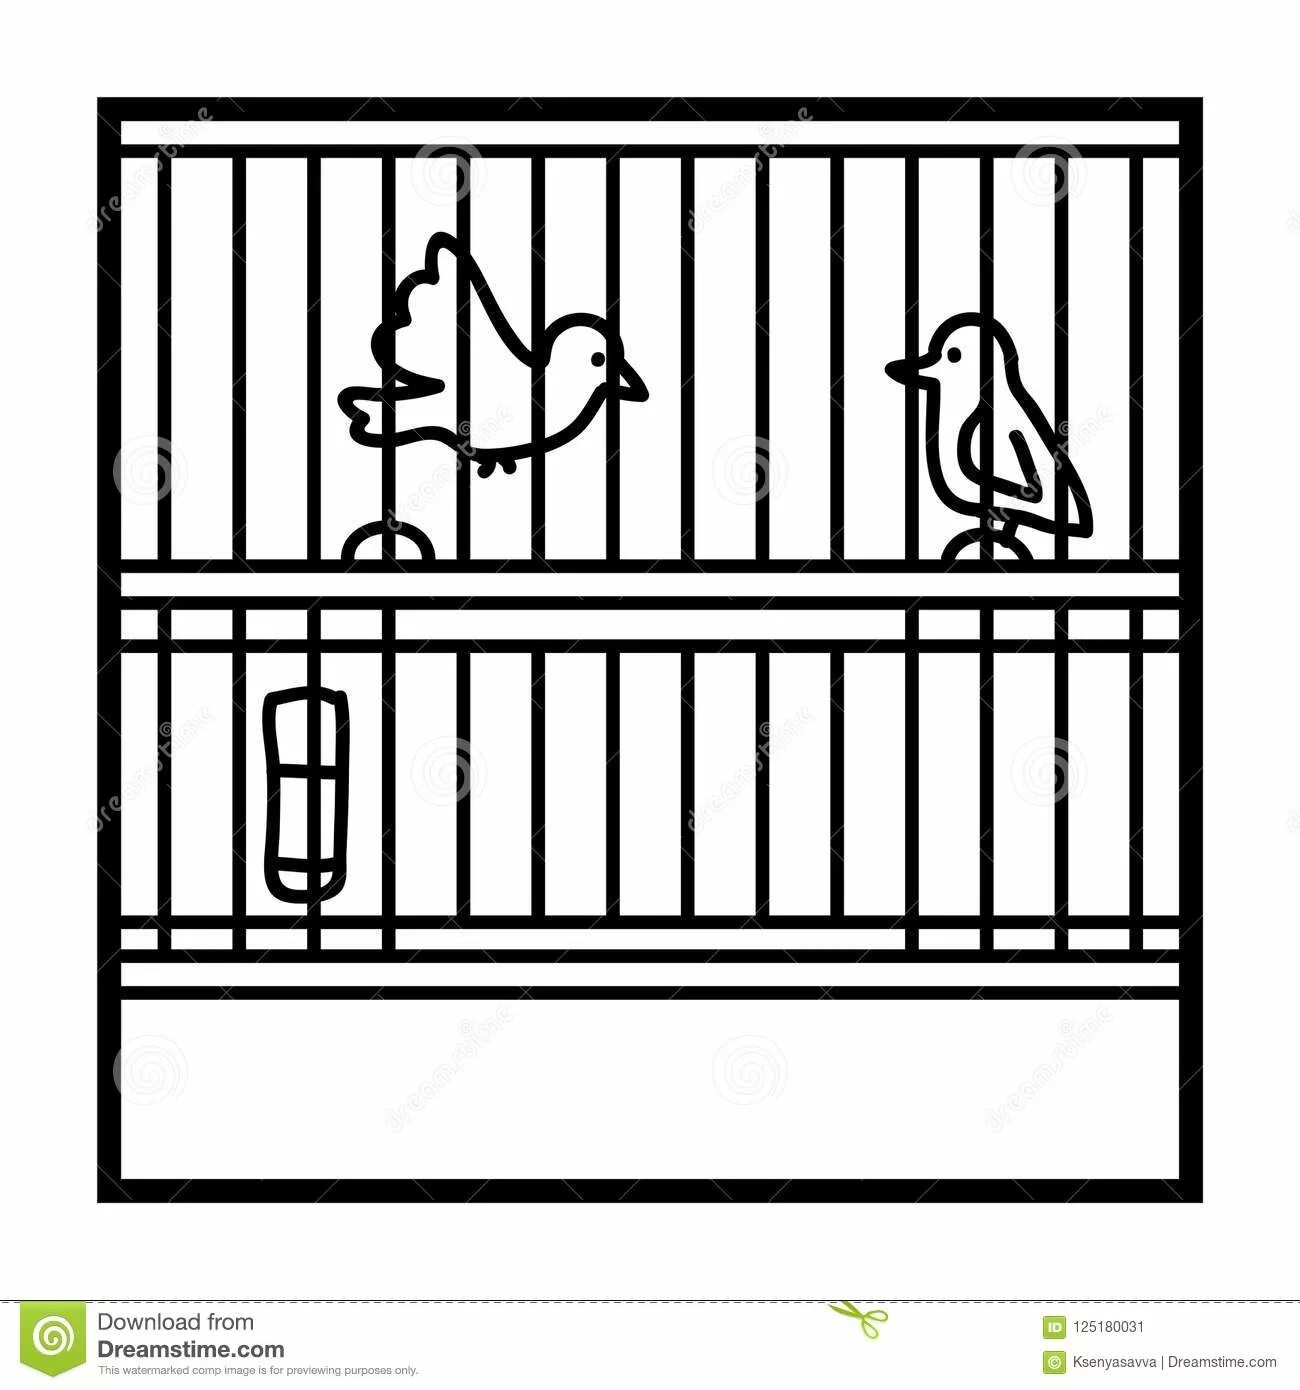 Caged parrot #8